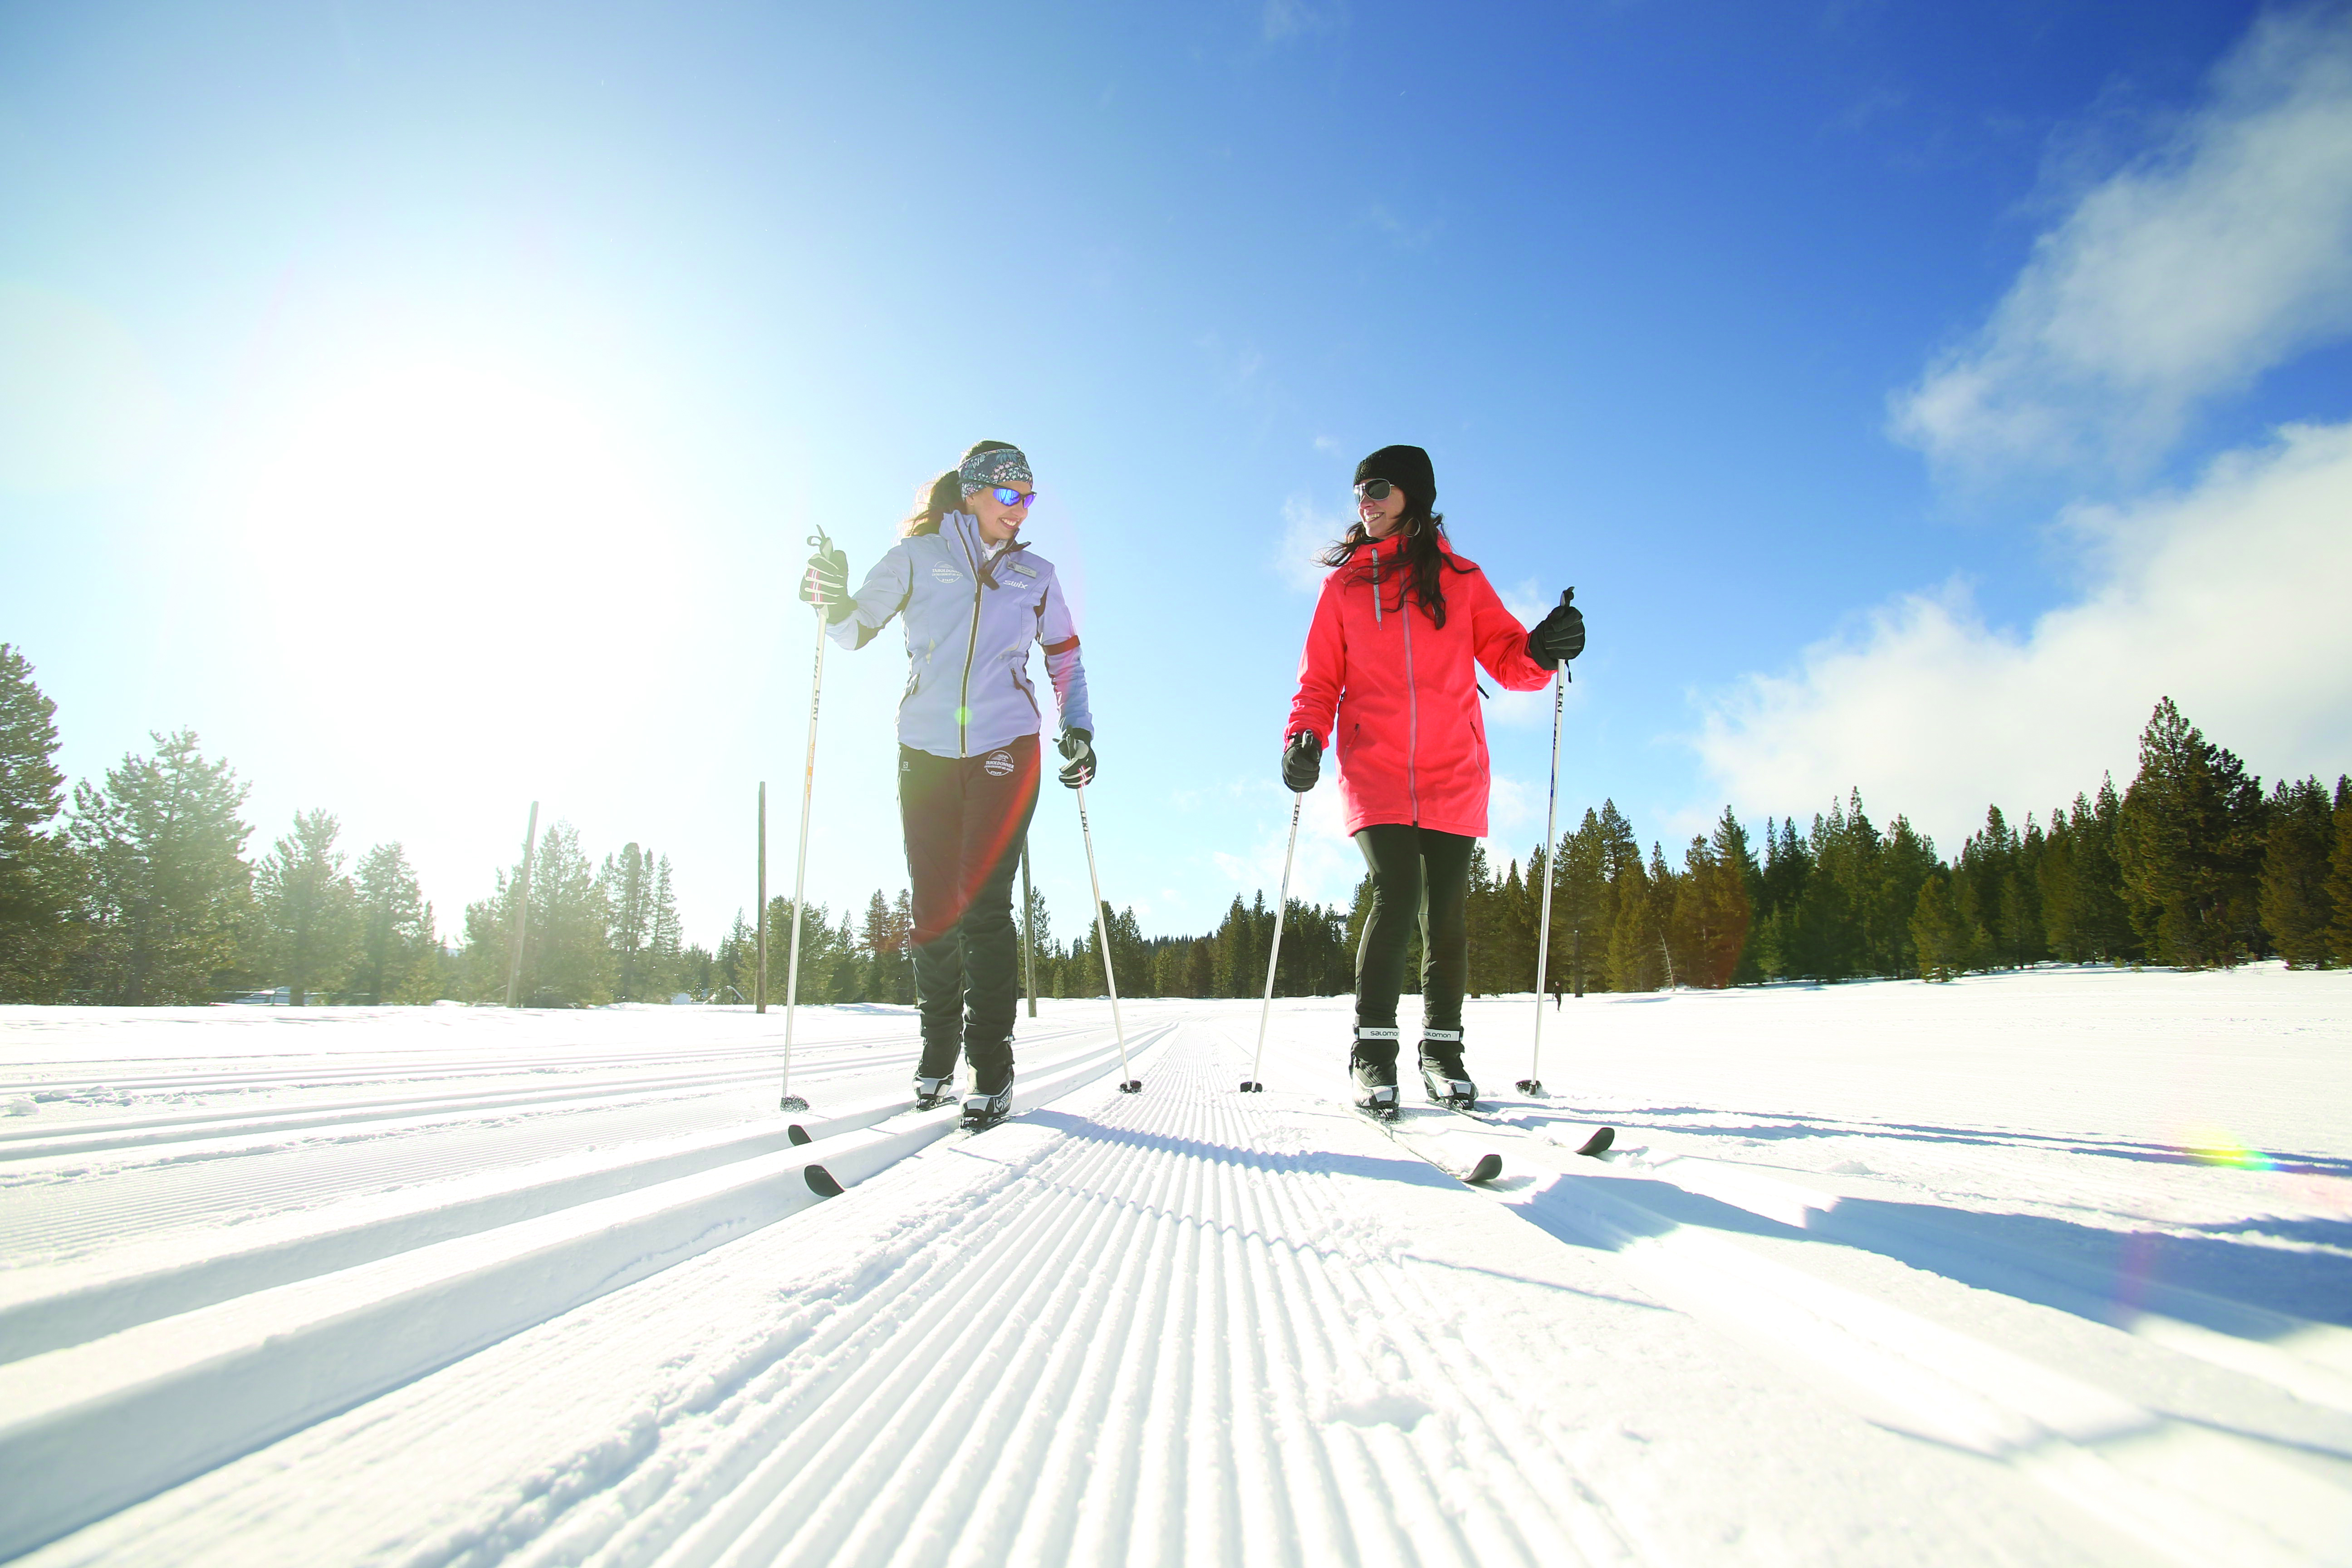 two women on skis on a snowy slope